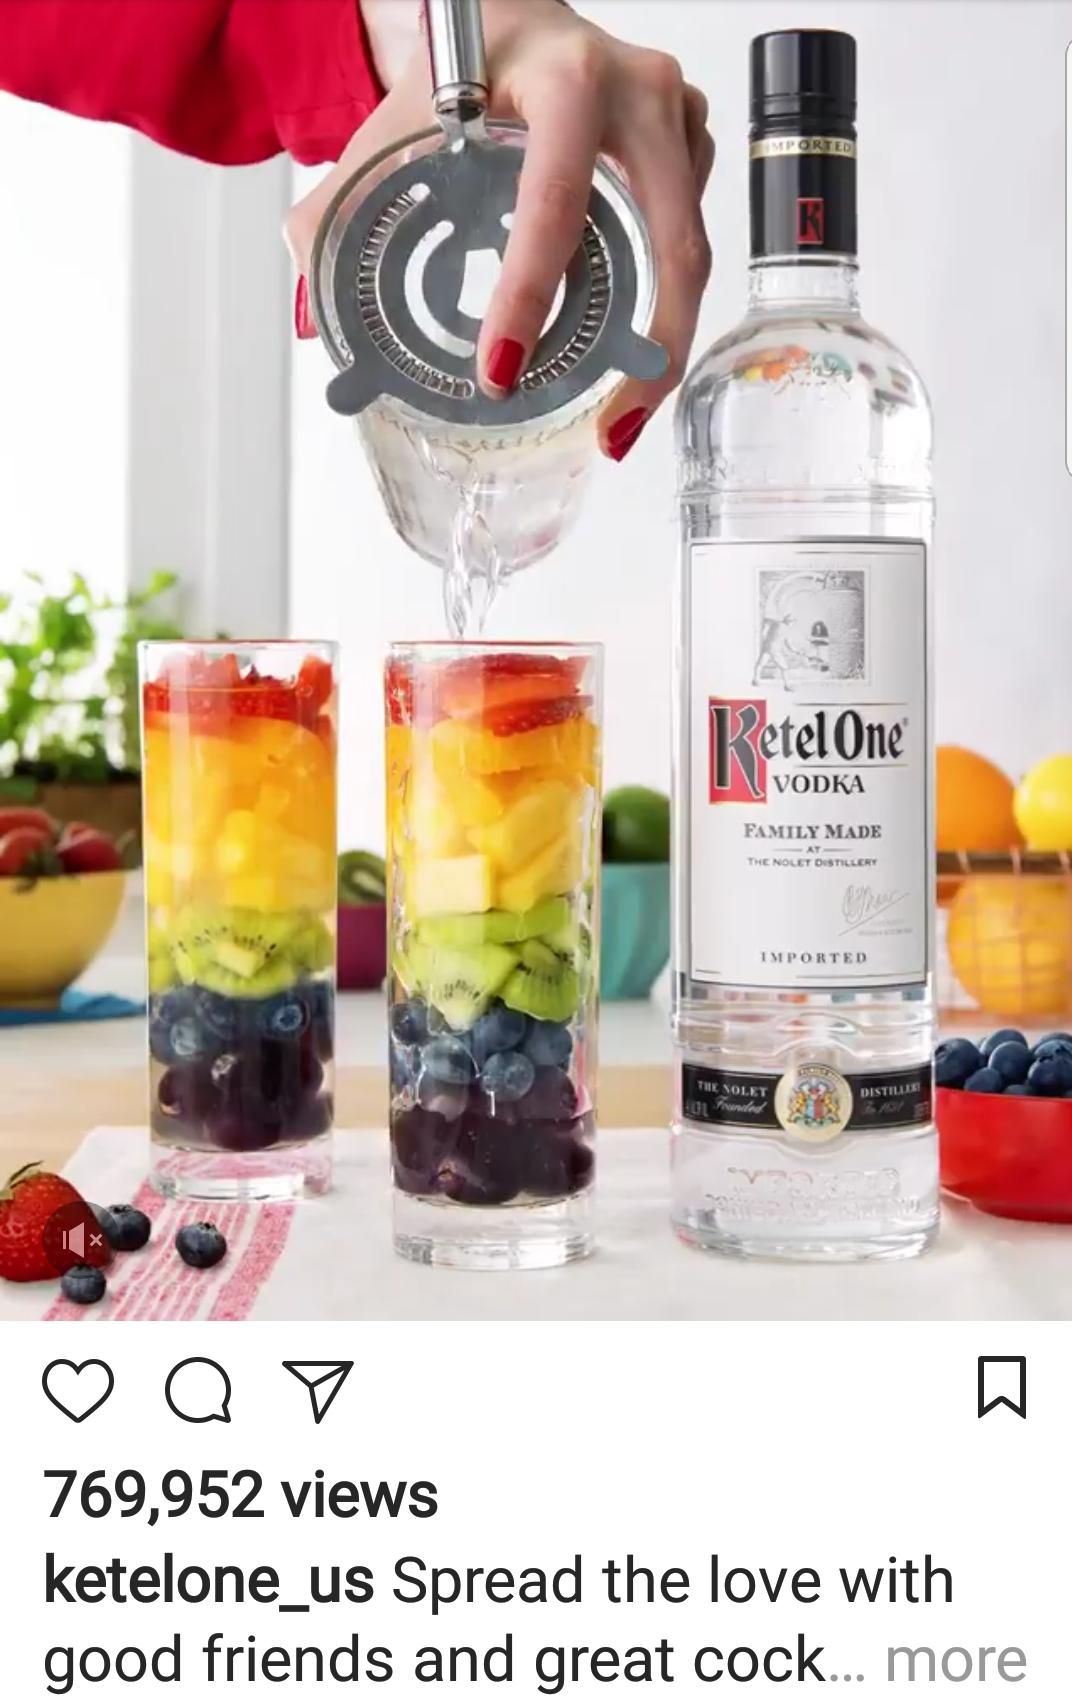 Oh my, Ketel One.